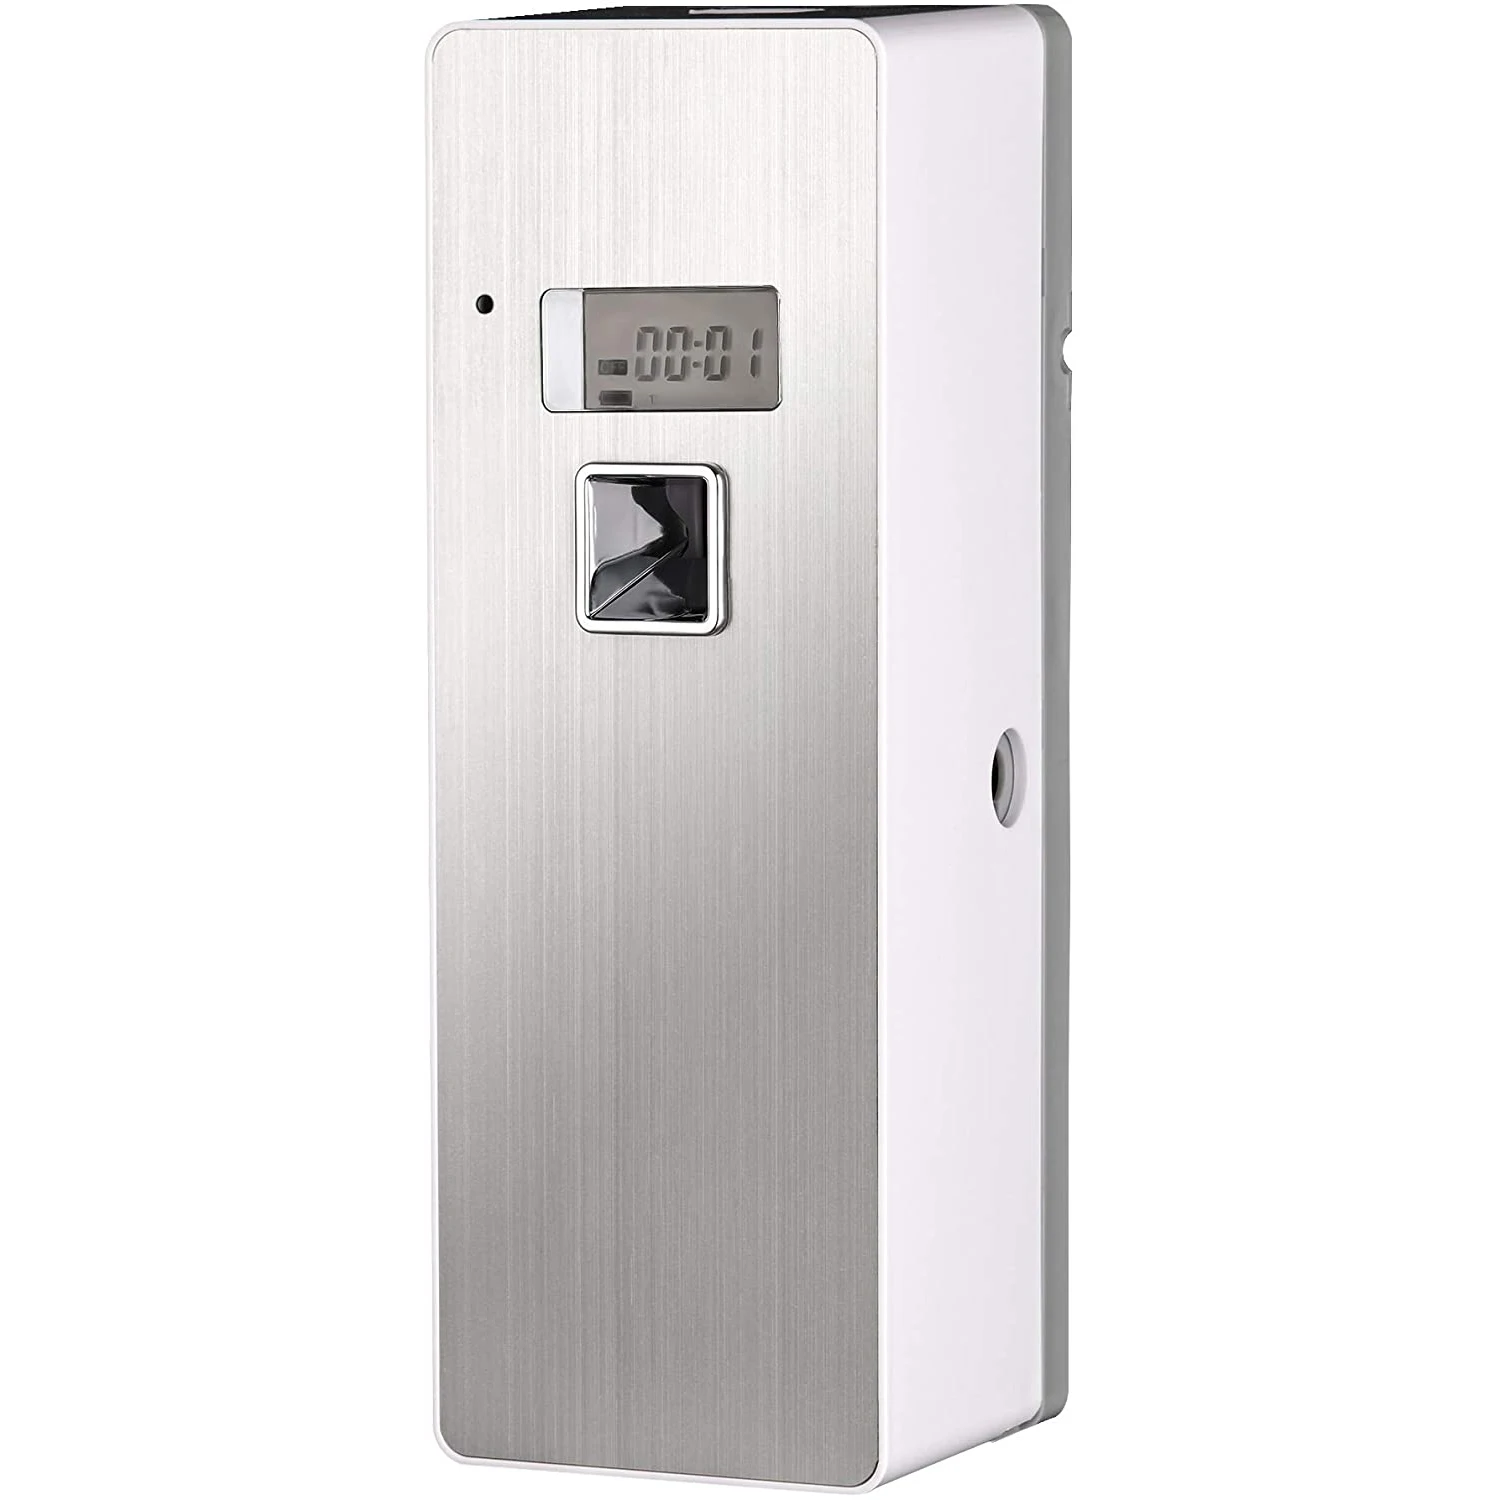 

Free Standing Wall-Mounted Home Odor Neutralizing Automatic Air Freshener Fragrance Aerosol Spray Dispenser Silver